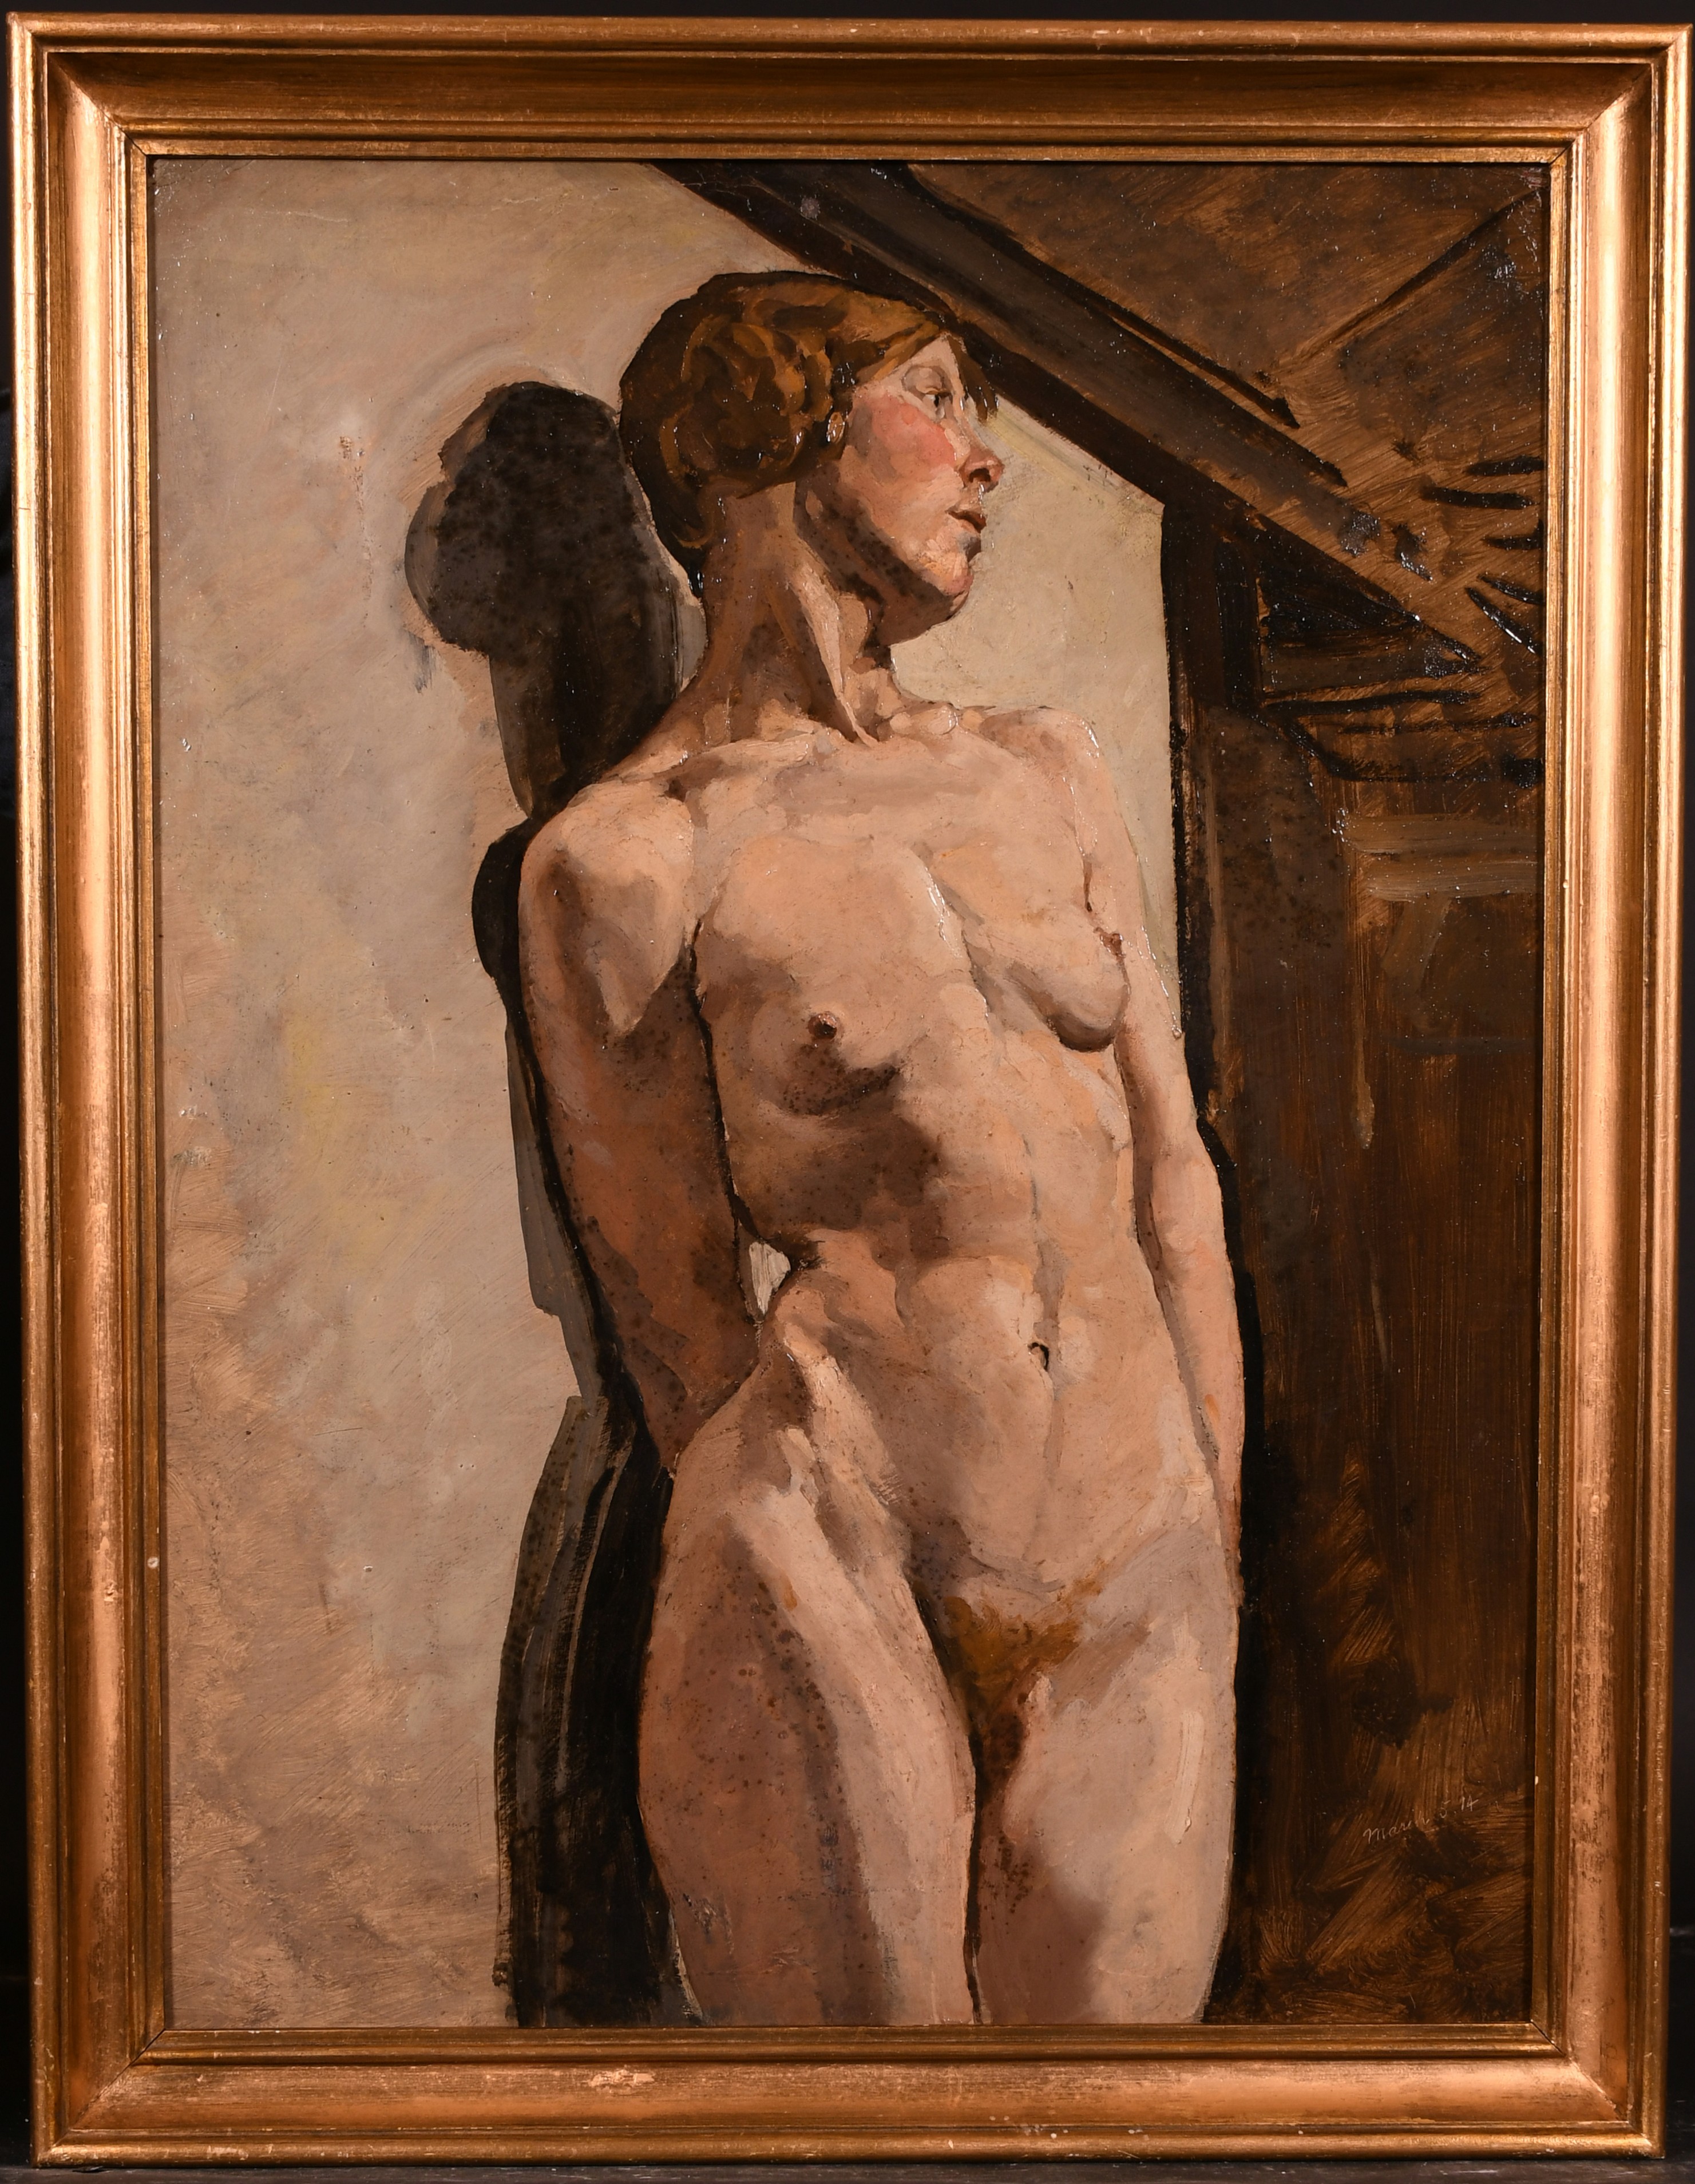 20th Century English School. A Standing Nude, Oil on Board, Signed and Dated ‘March 5.14’ - Image 2 of 5